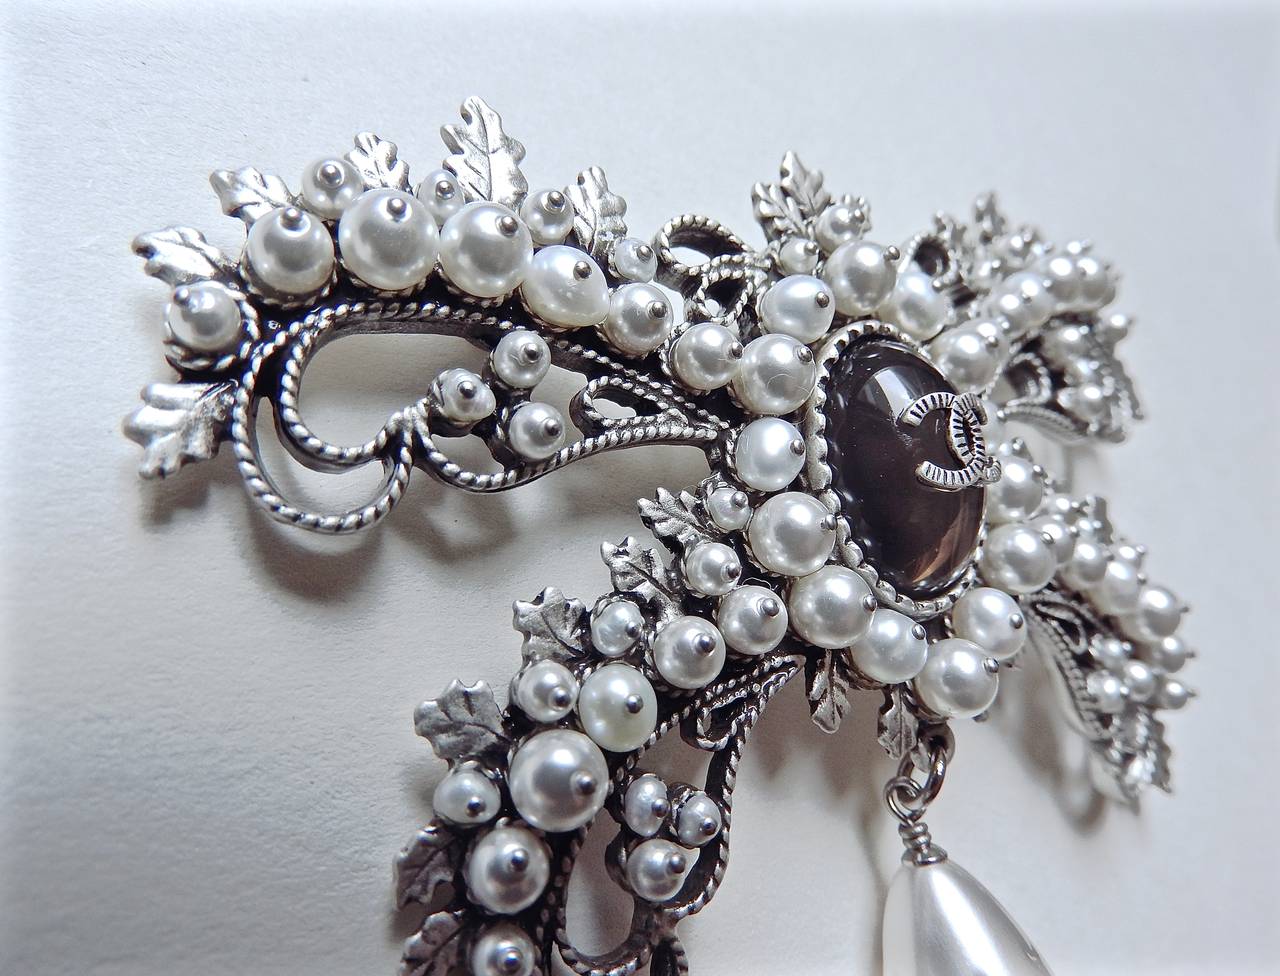 This impeccable elegant brooch is from 2015 Chanel Métiers d'Art Paris-Salzburg collection. Exquisitely handmade with antique like silver plating metal and embellished with fresh water pearls, large teardrop Gripoix glass pearl, then adorned with